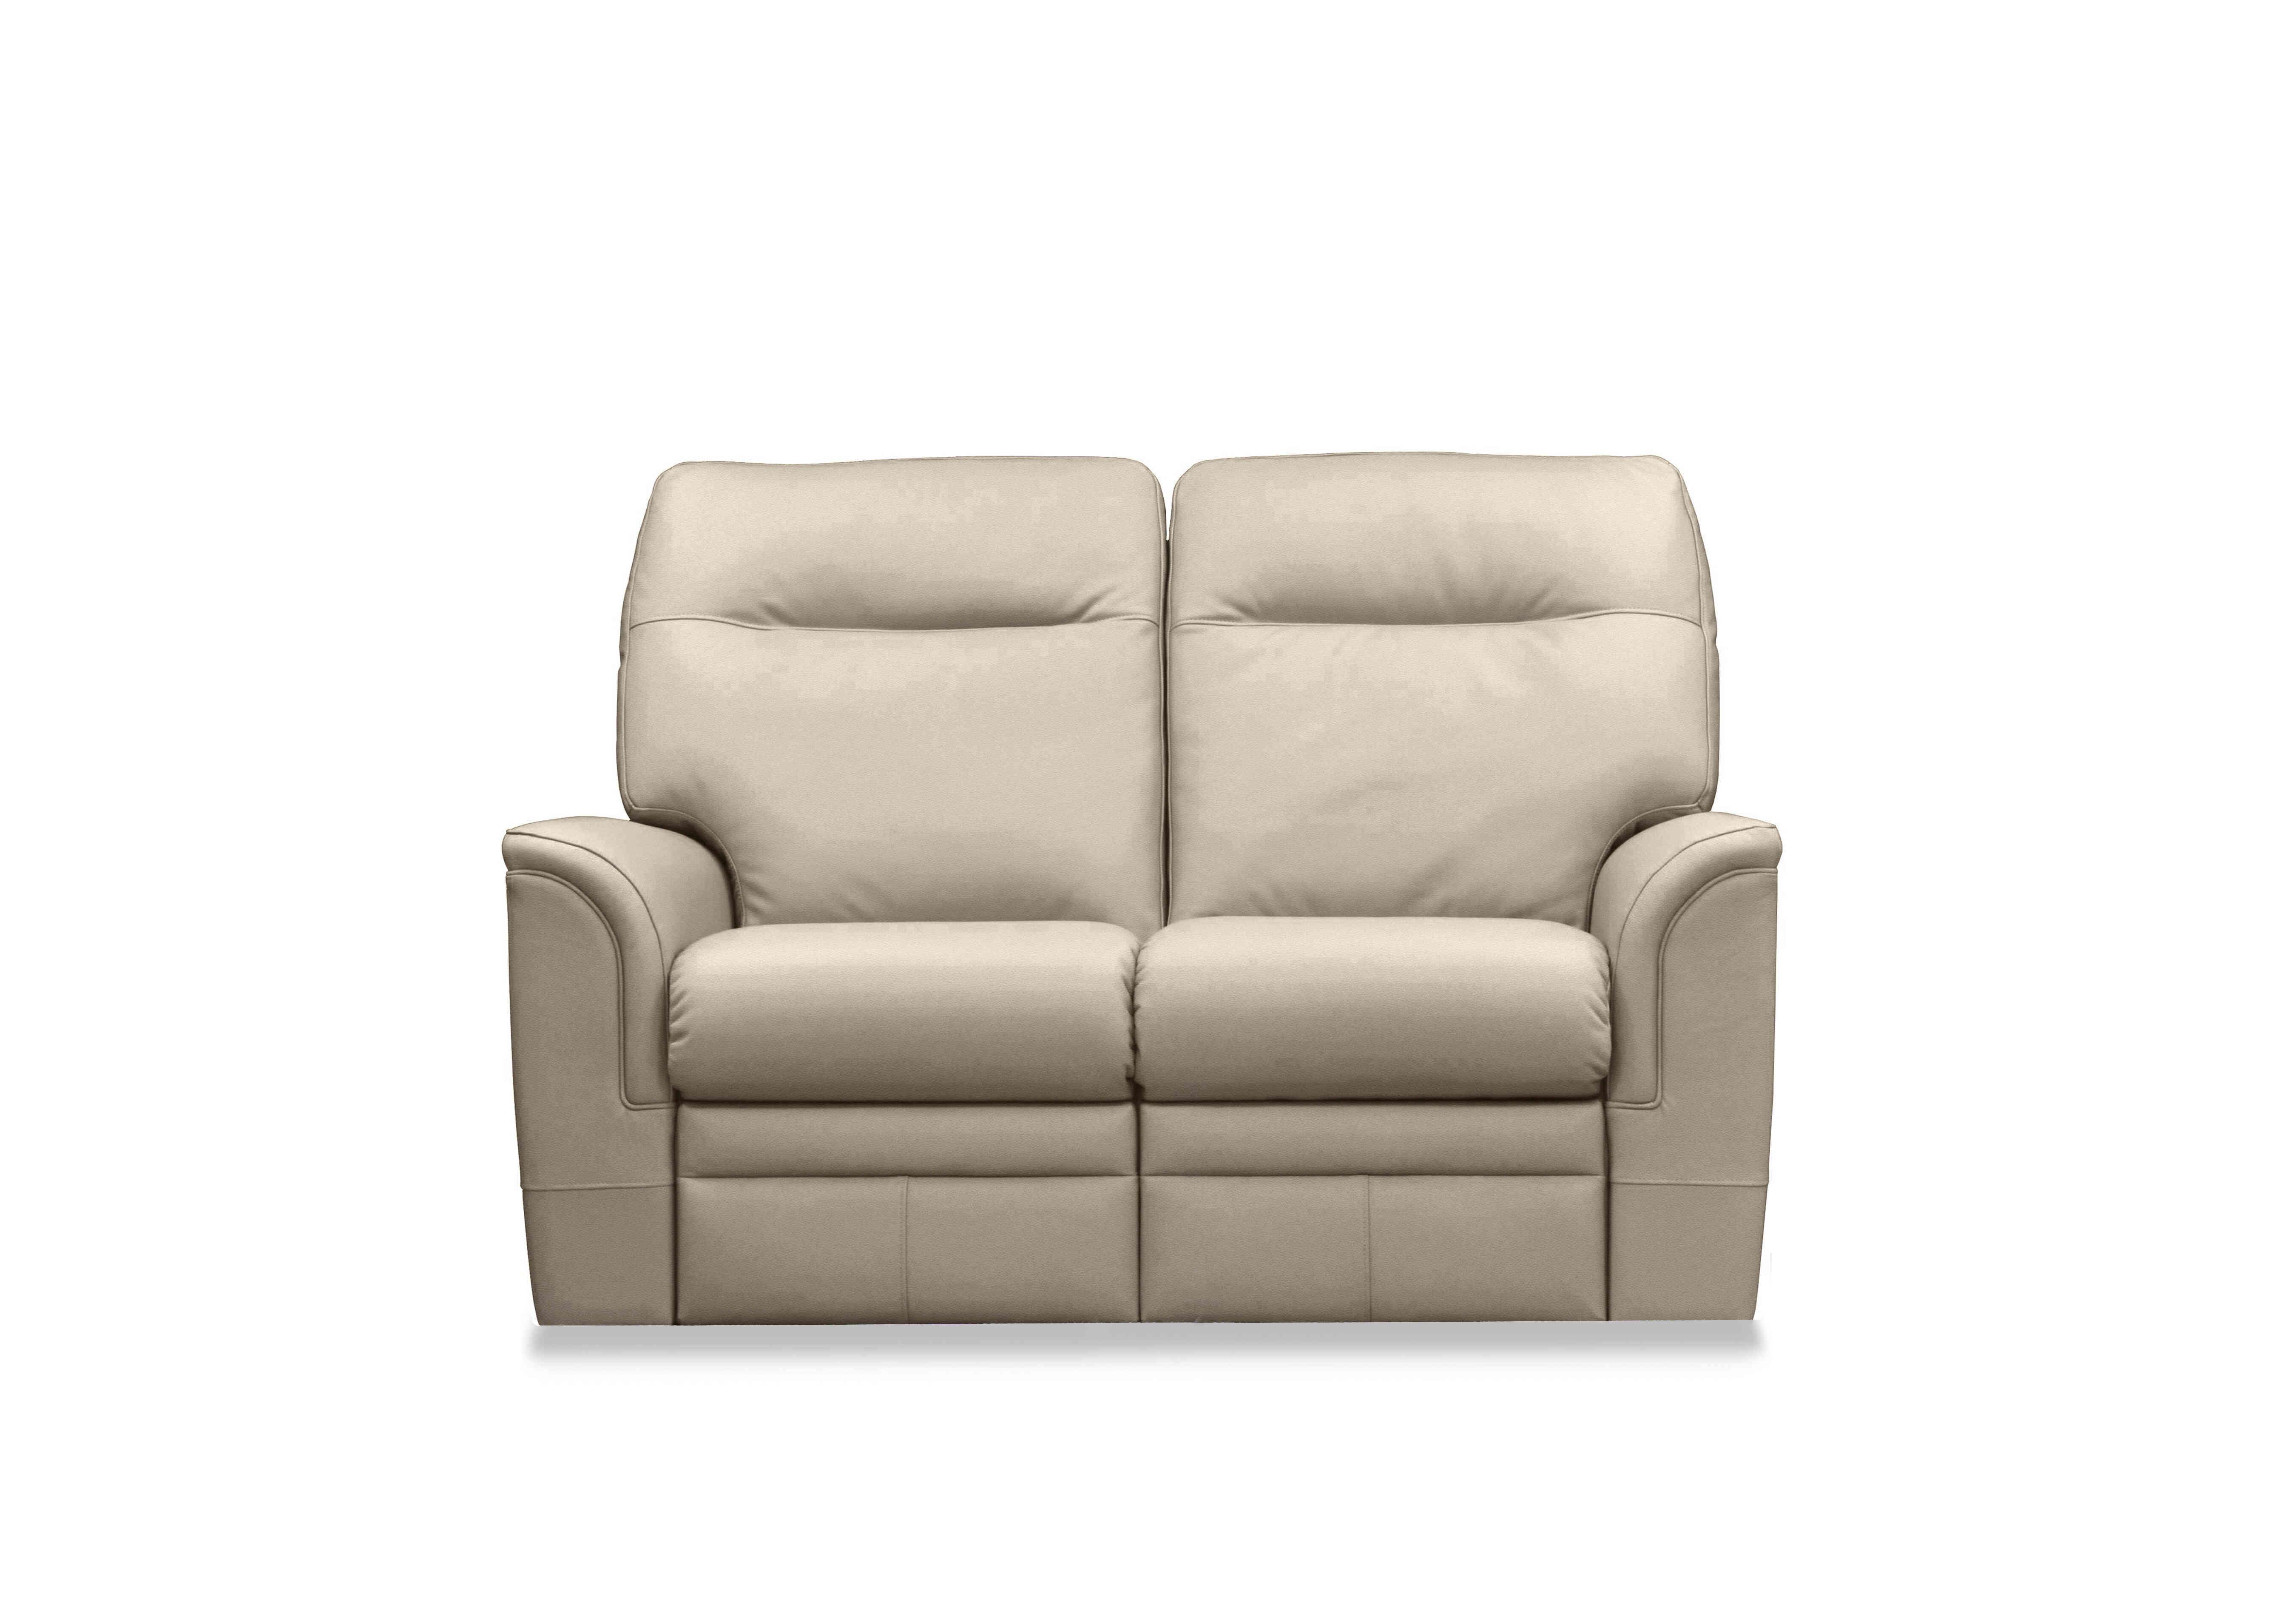 Hudson 23 Leather 2 Seater Power Recliner Sofa with Power Headrests and Power Lumbar in Como Taupe 0053051-0019 on Furniture Village